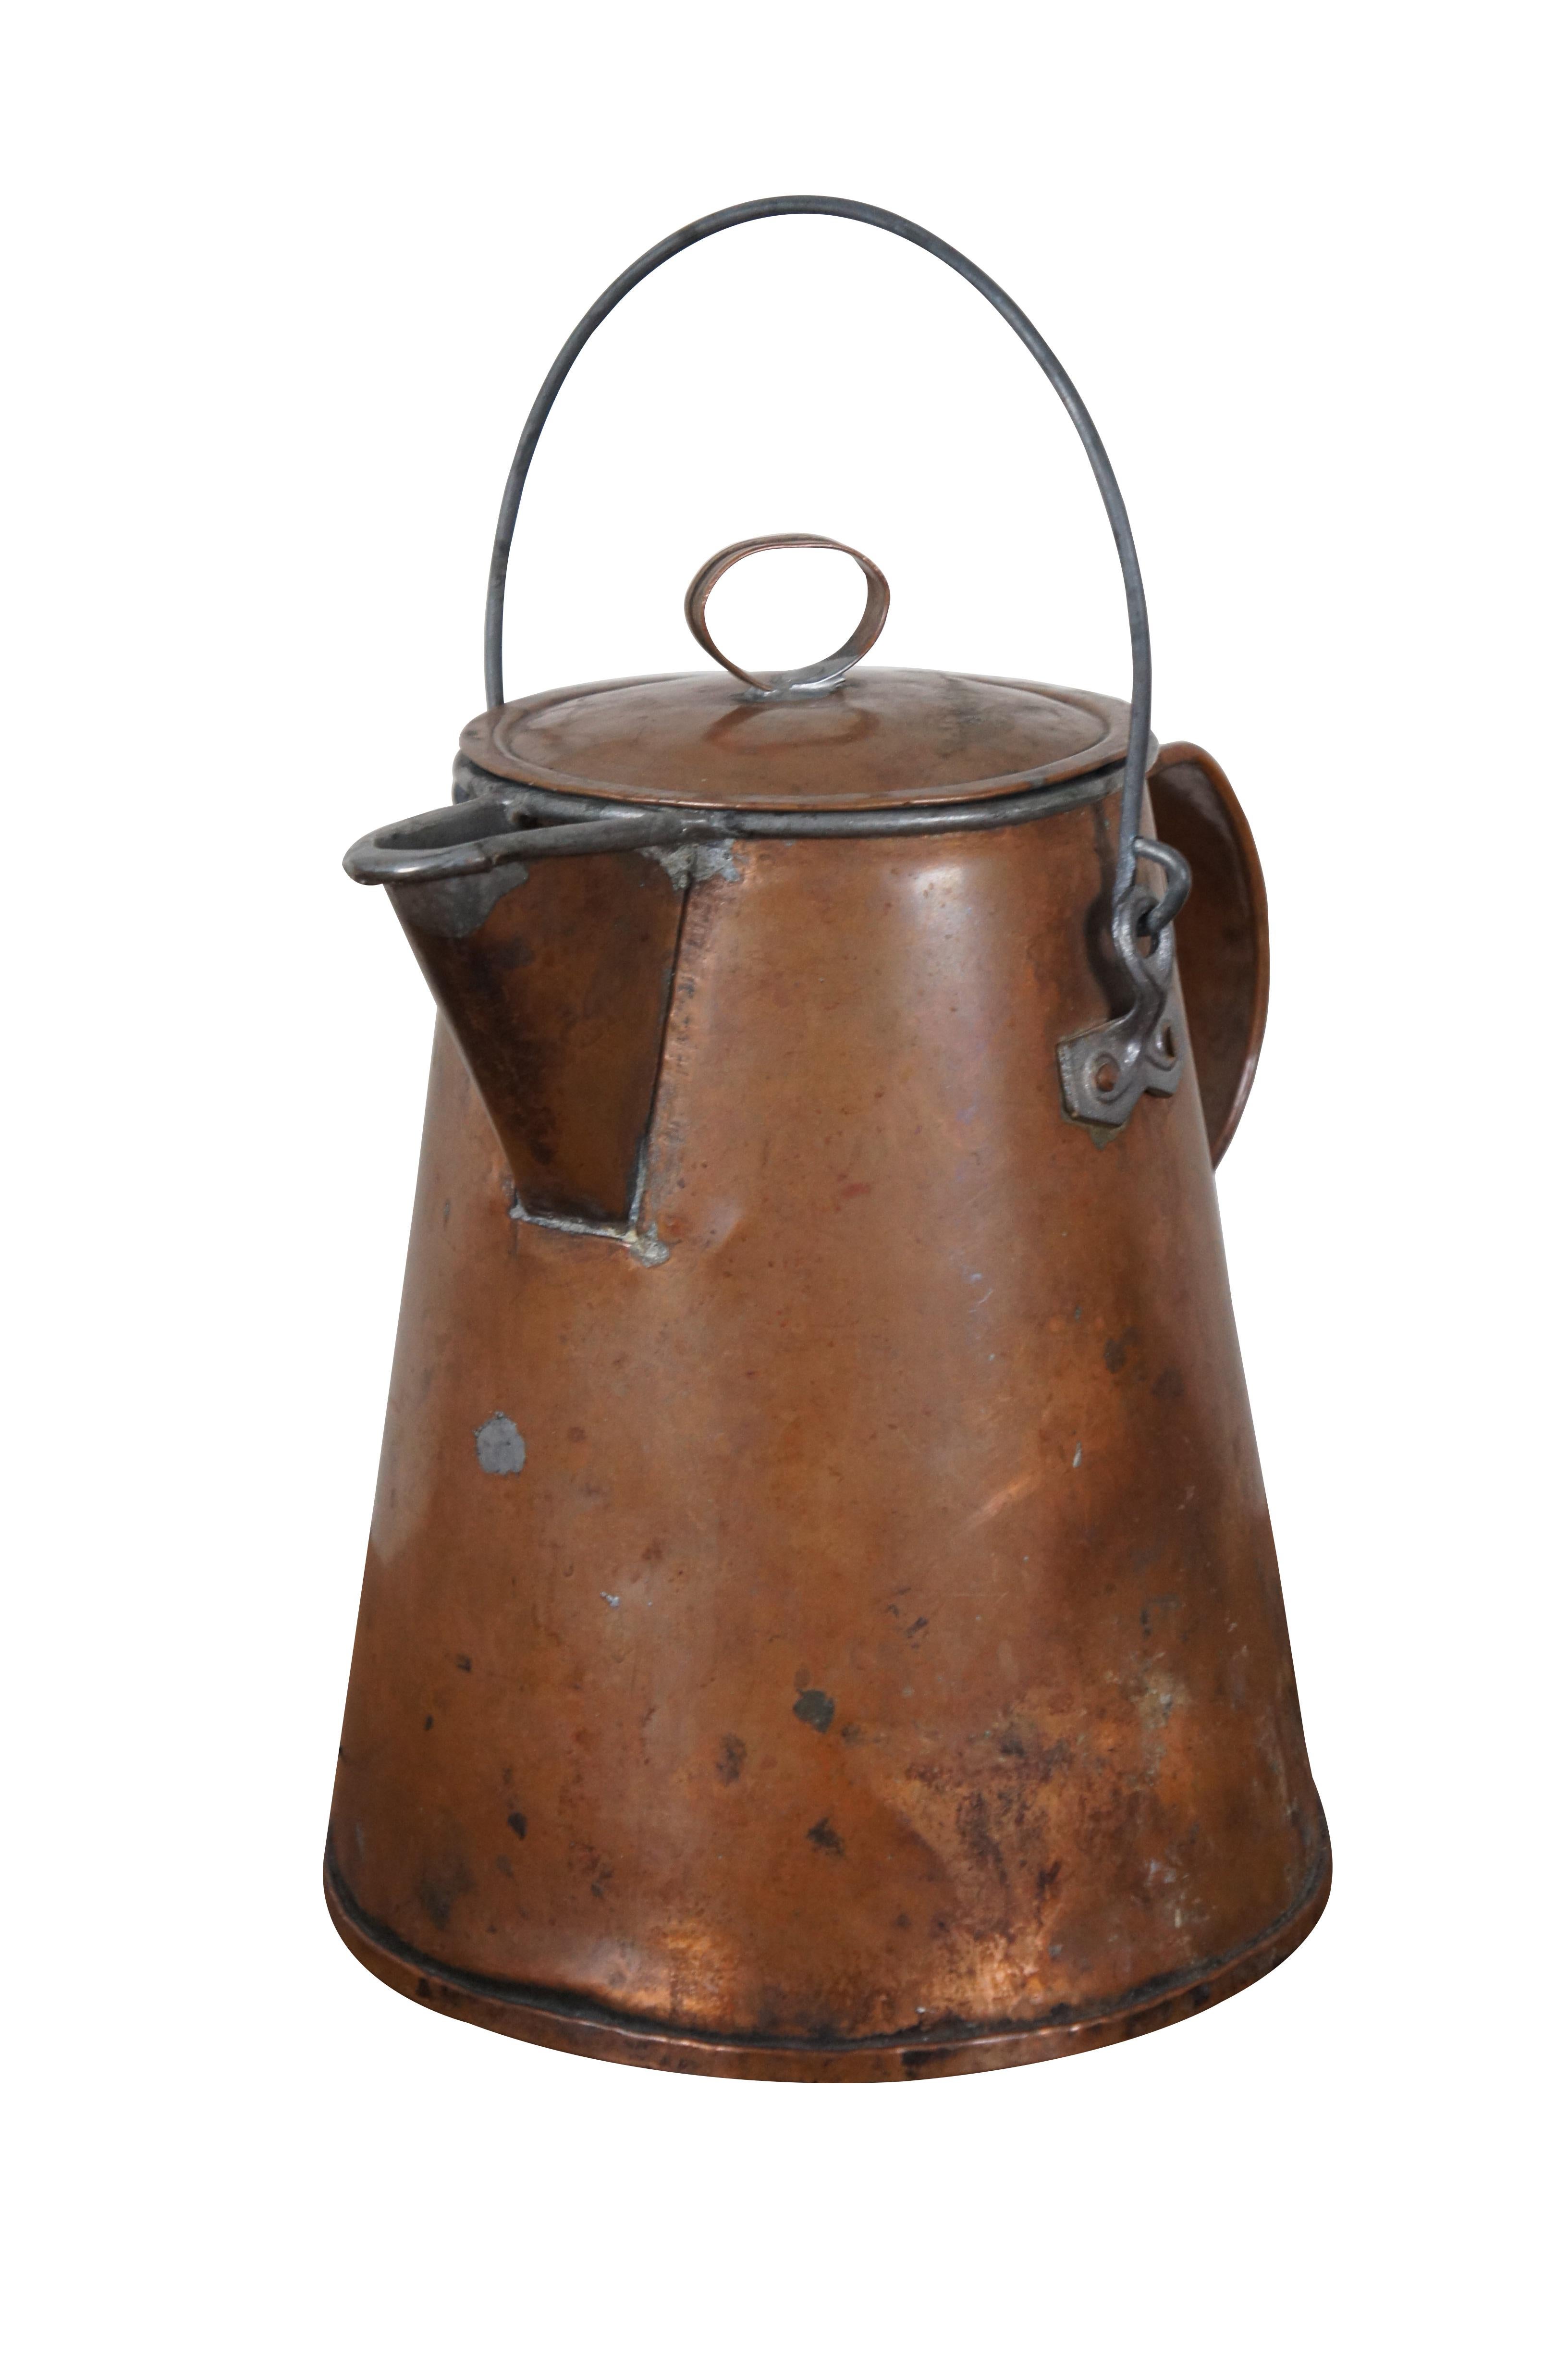 Antique copper teapot / coffee pot featuring primitive styling with nice handles and lid.

Dimensions:
10.75